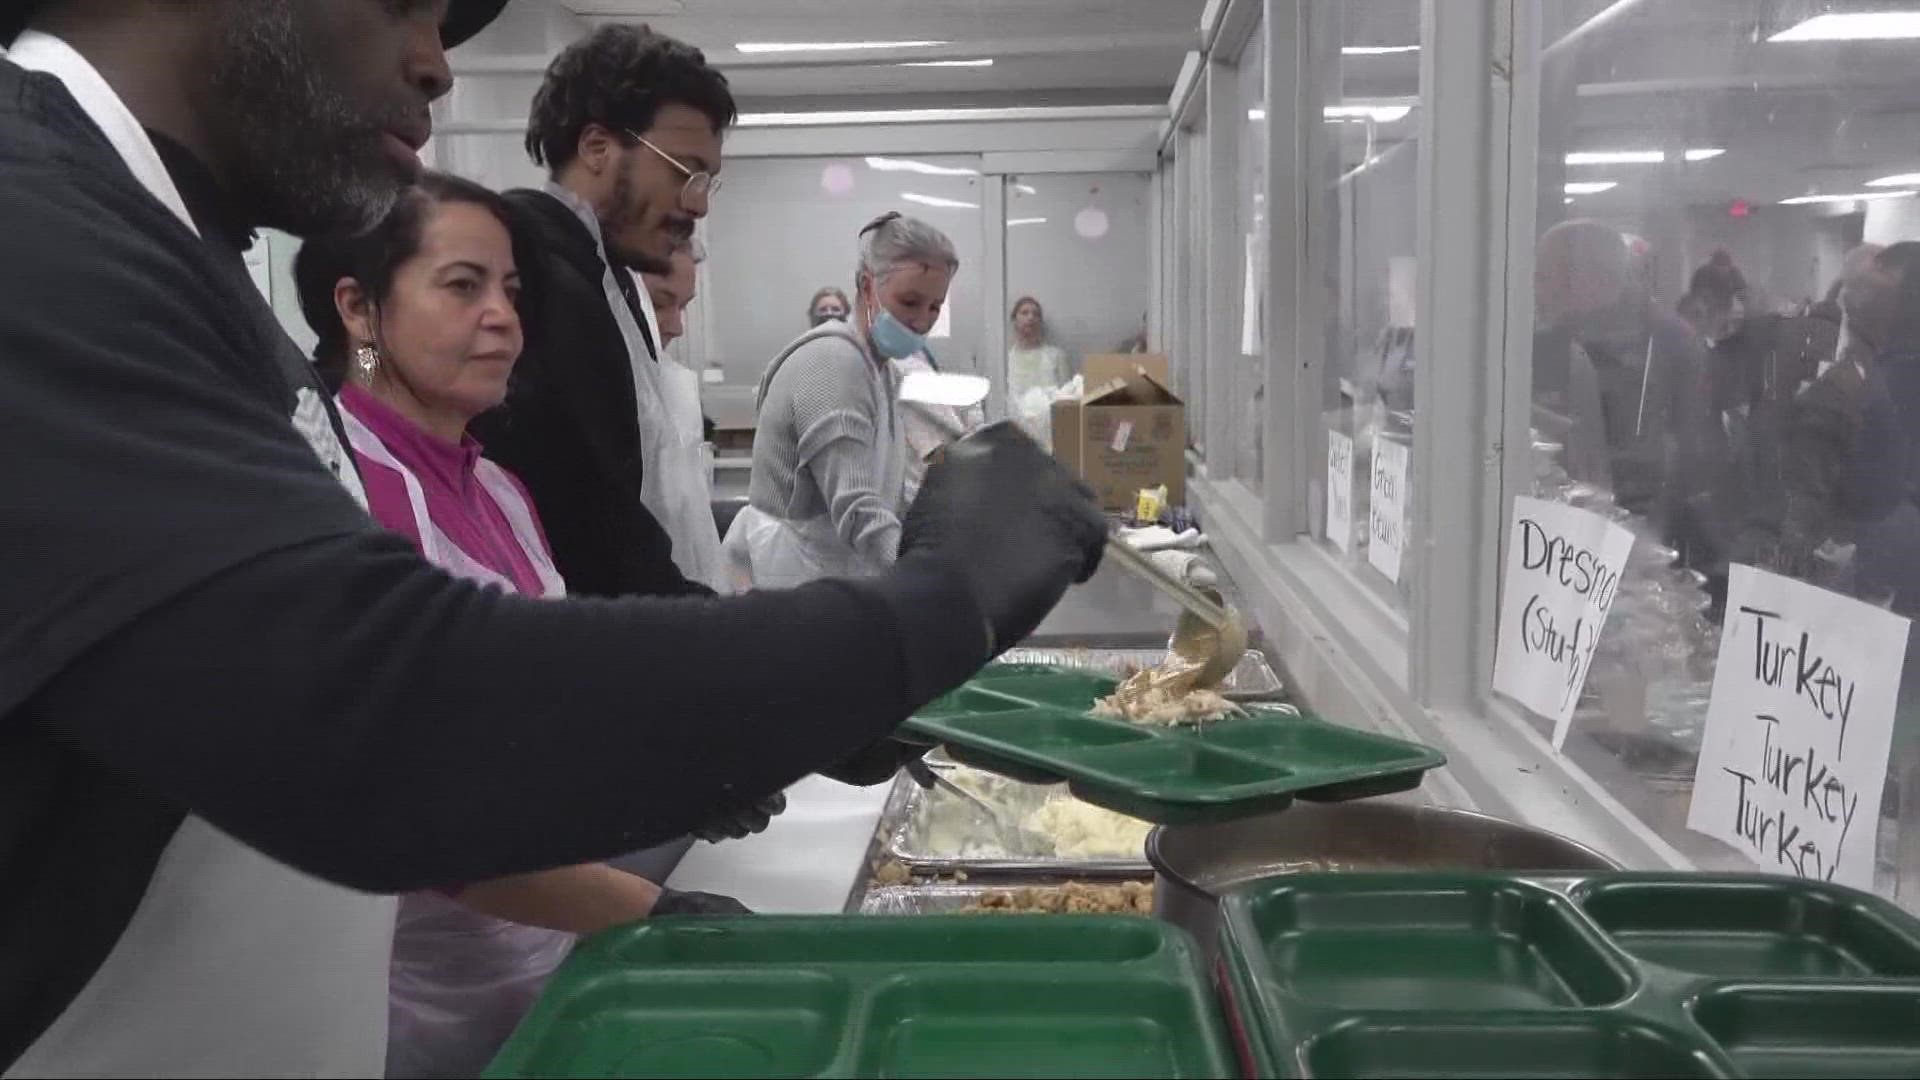 Emma Henderson reports on the Cleveland Thanksgiving tradition that aims to help feed the less fortunate.